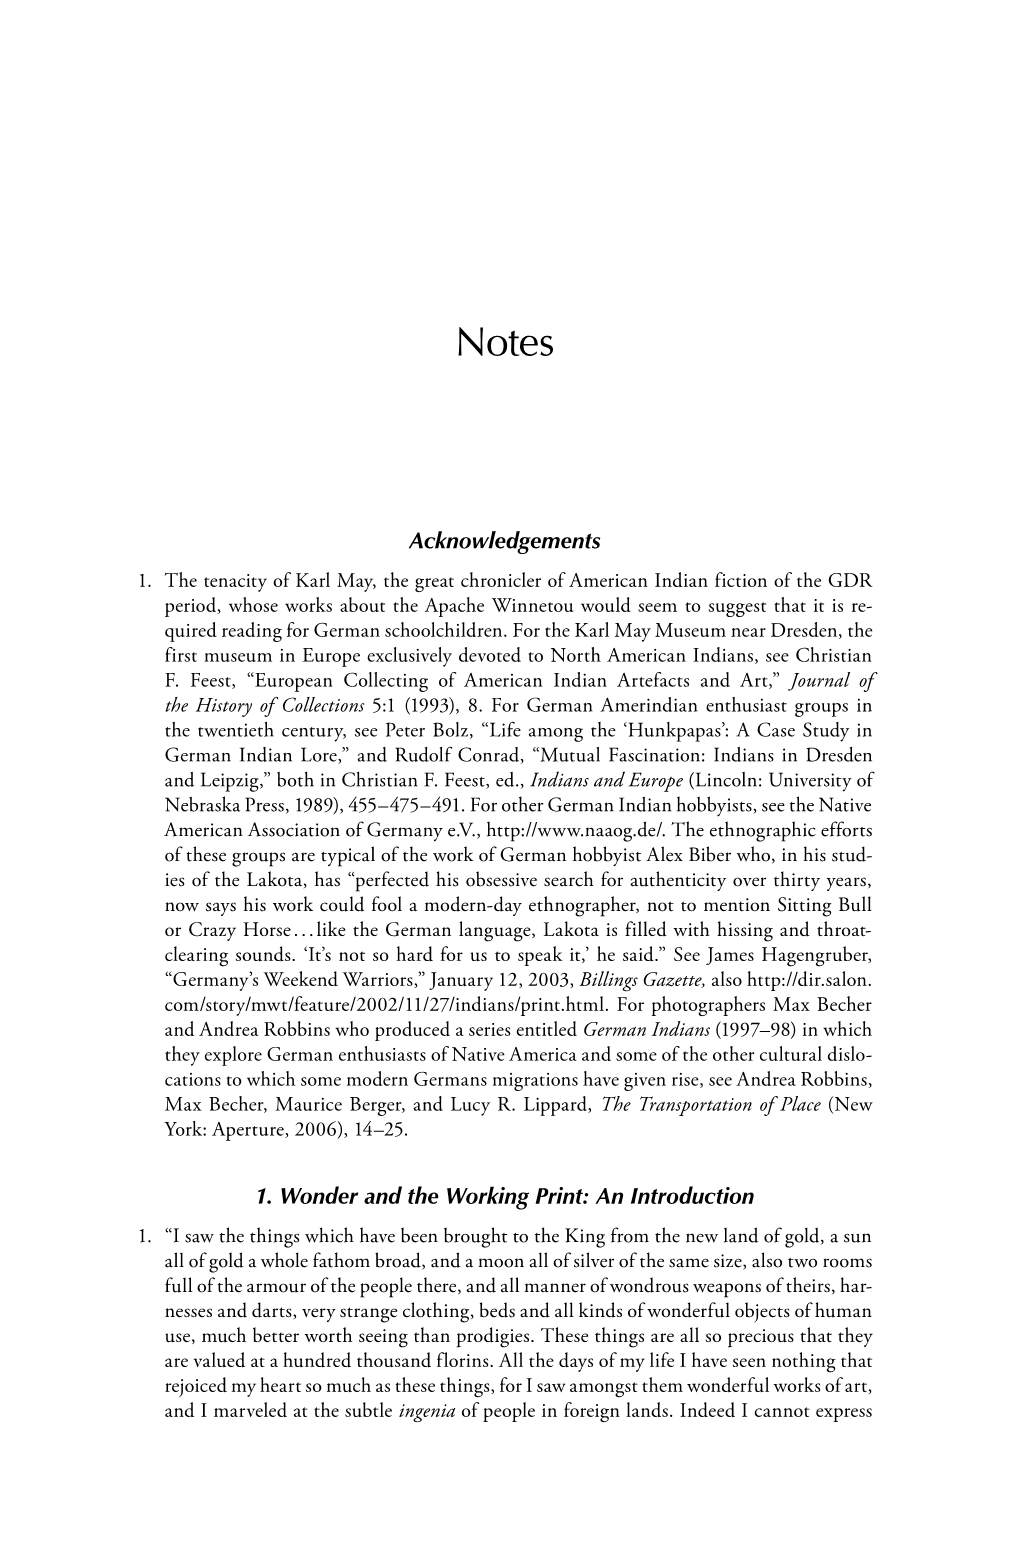 Acknowledgements 1. Wonder and the Working Print: an Introduction